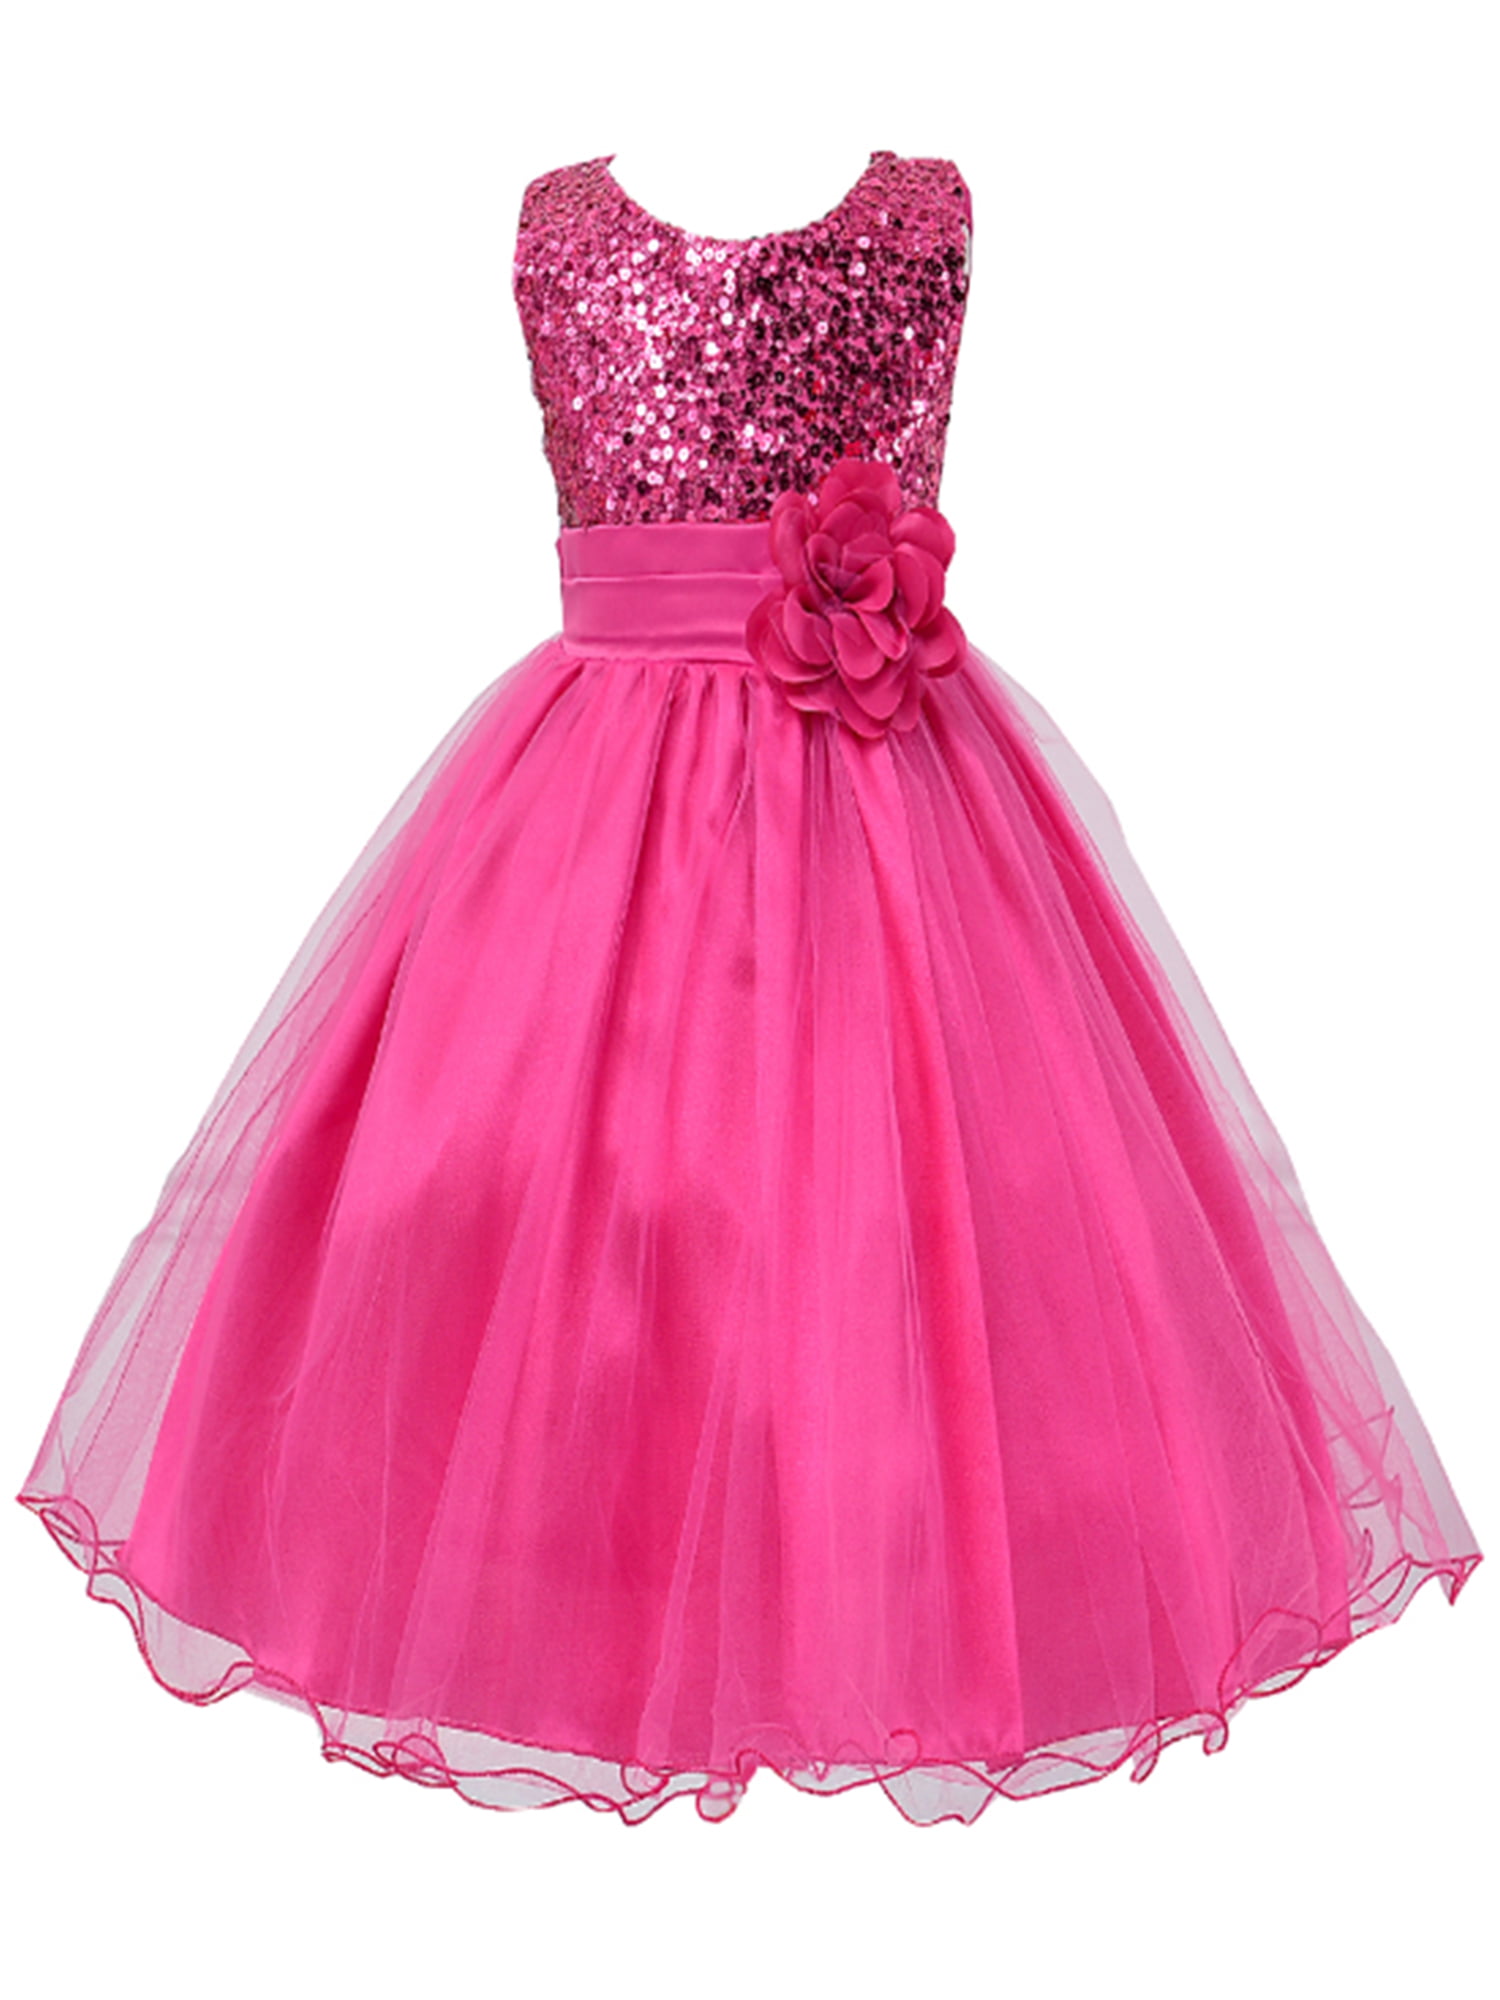 New Flower Girl Party Bridesmaid Pageant Dress in Pink,Red,White 2-3 to 5-6 Year 